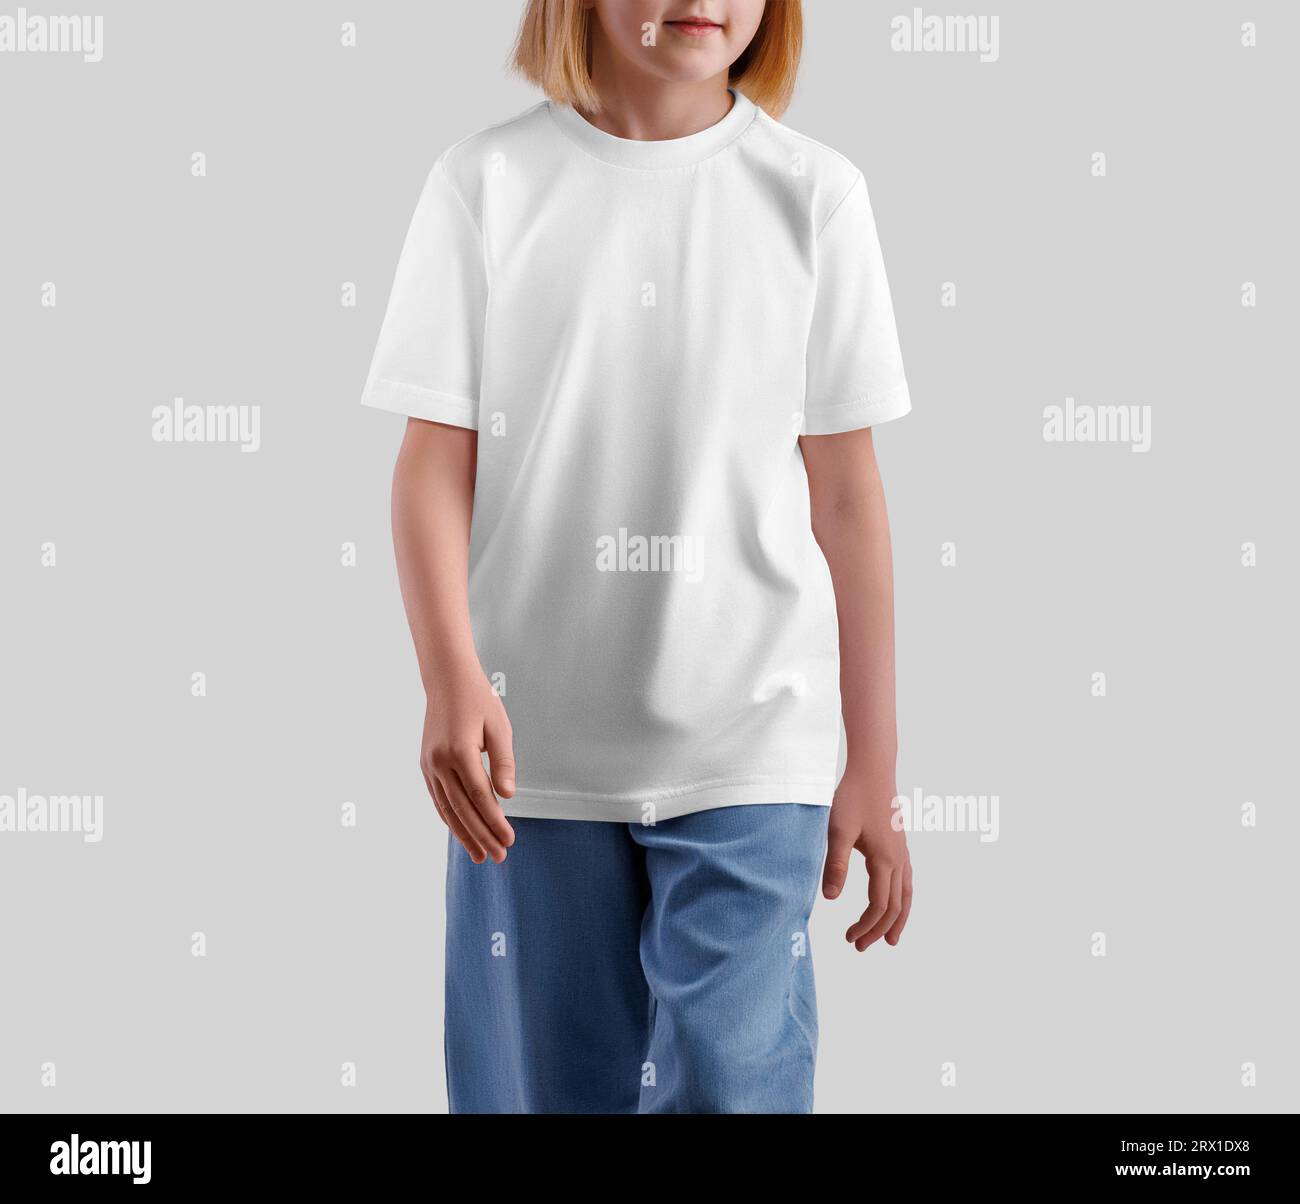 Mockup of a white t-shirt on a walking girl, isolated on the background, front view. Template of a stylish kid's shirt for design, print, pattern. Fas Stock Photo